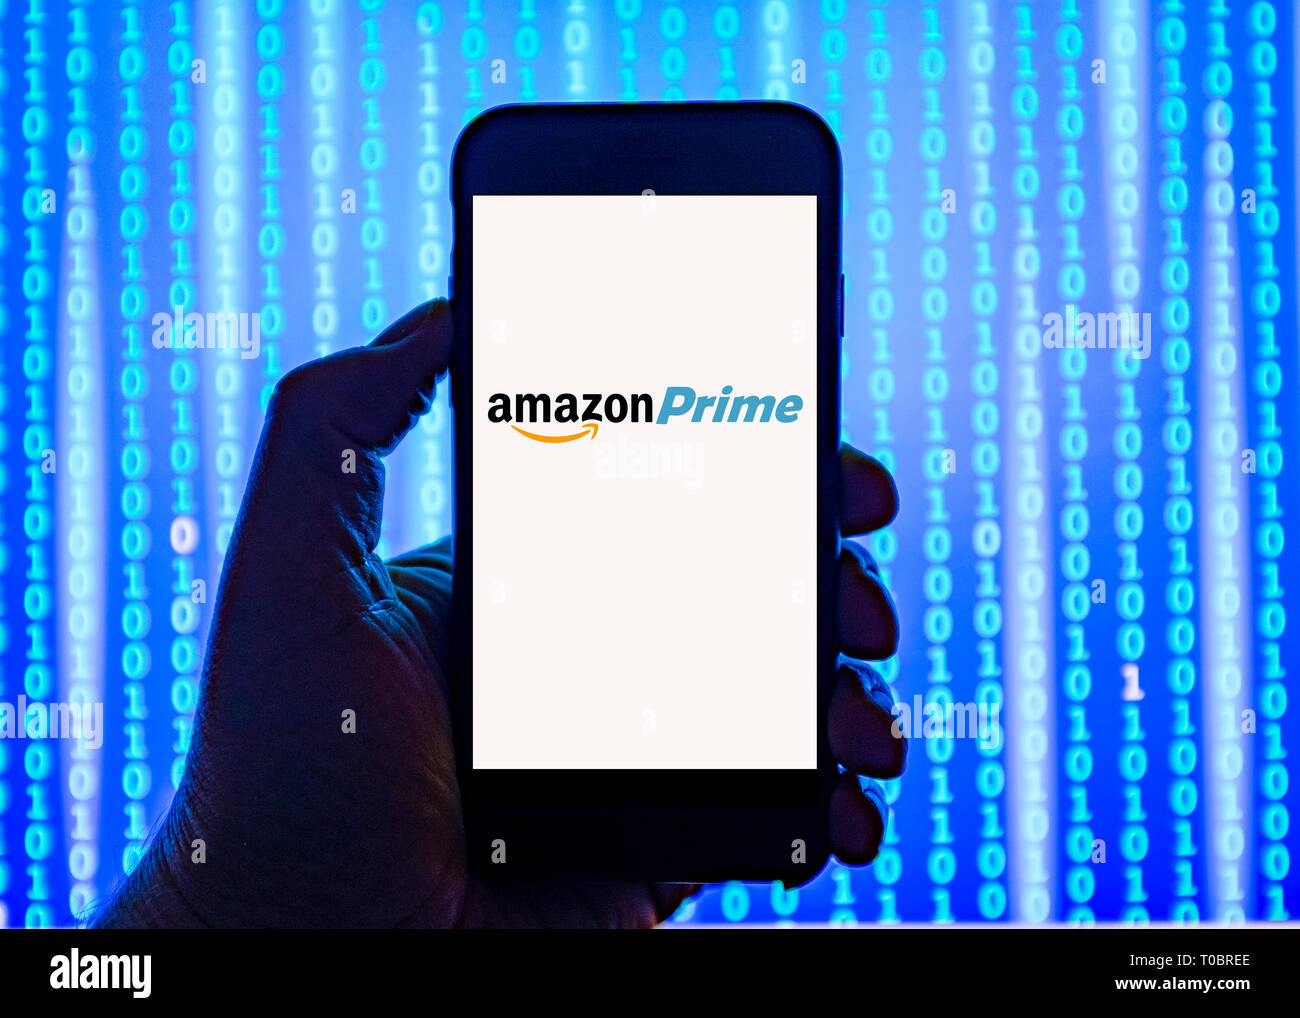 Person holding smart phone with Amazon Prime logo displayed on the screen. Stock Photo